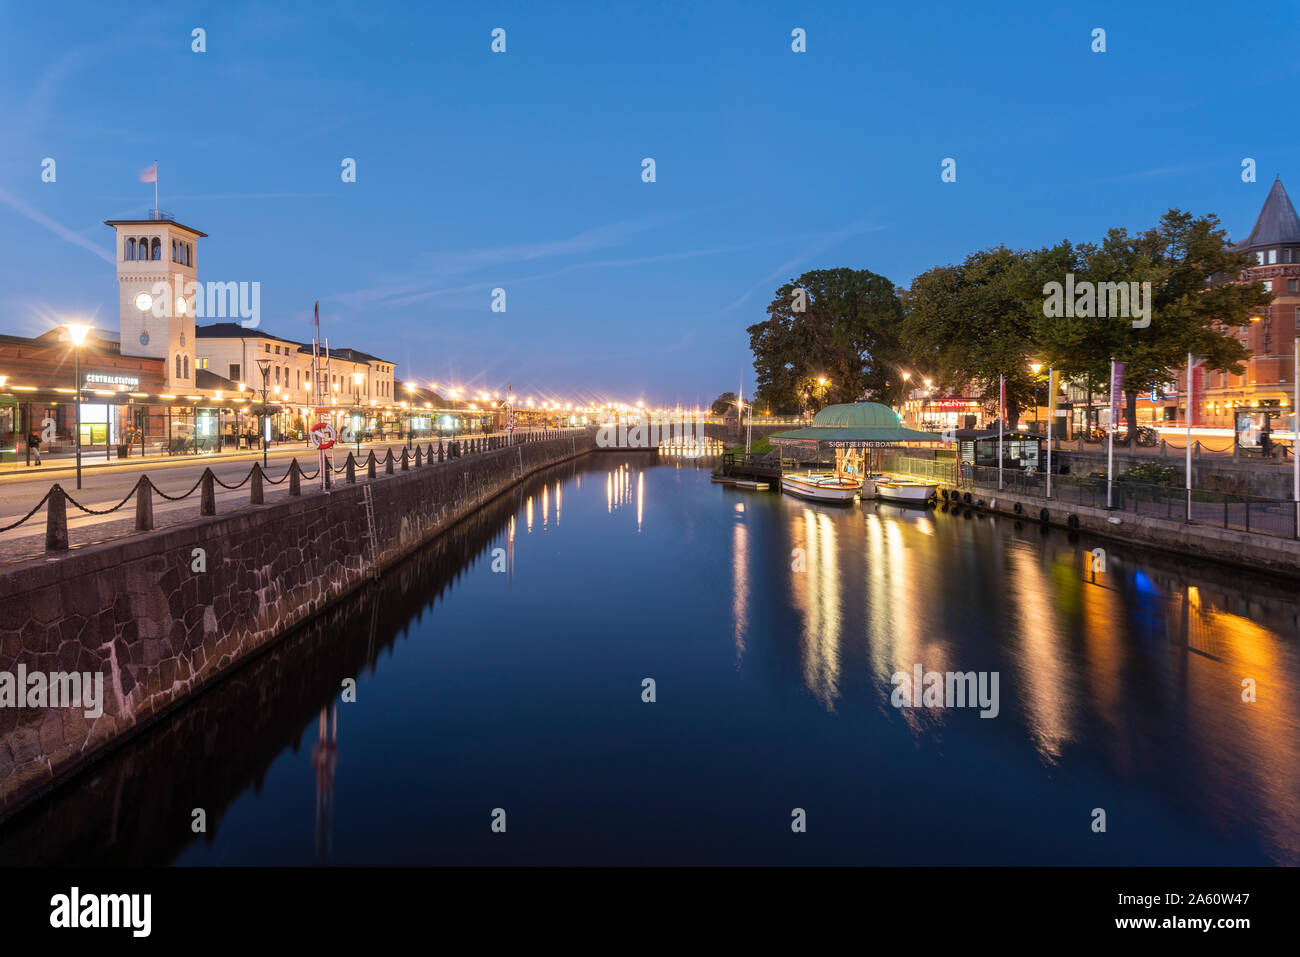 River against blue sky at night in Malmo, Sweden Stock Photo